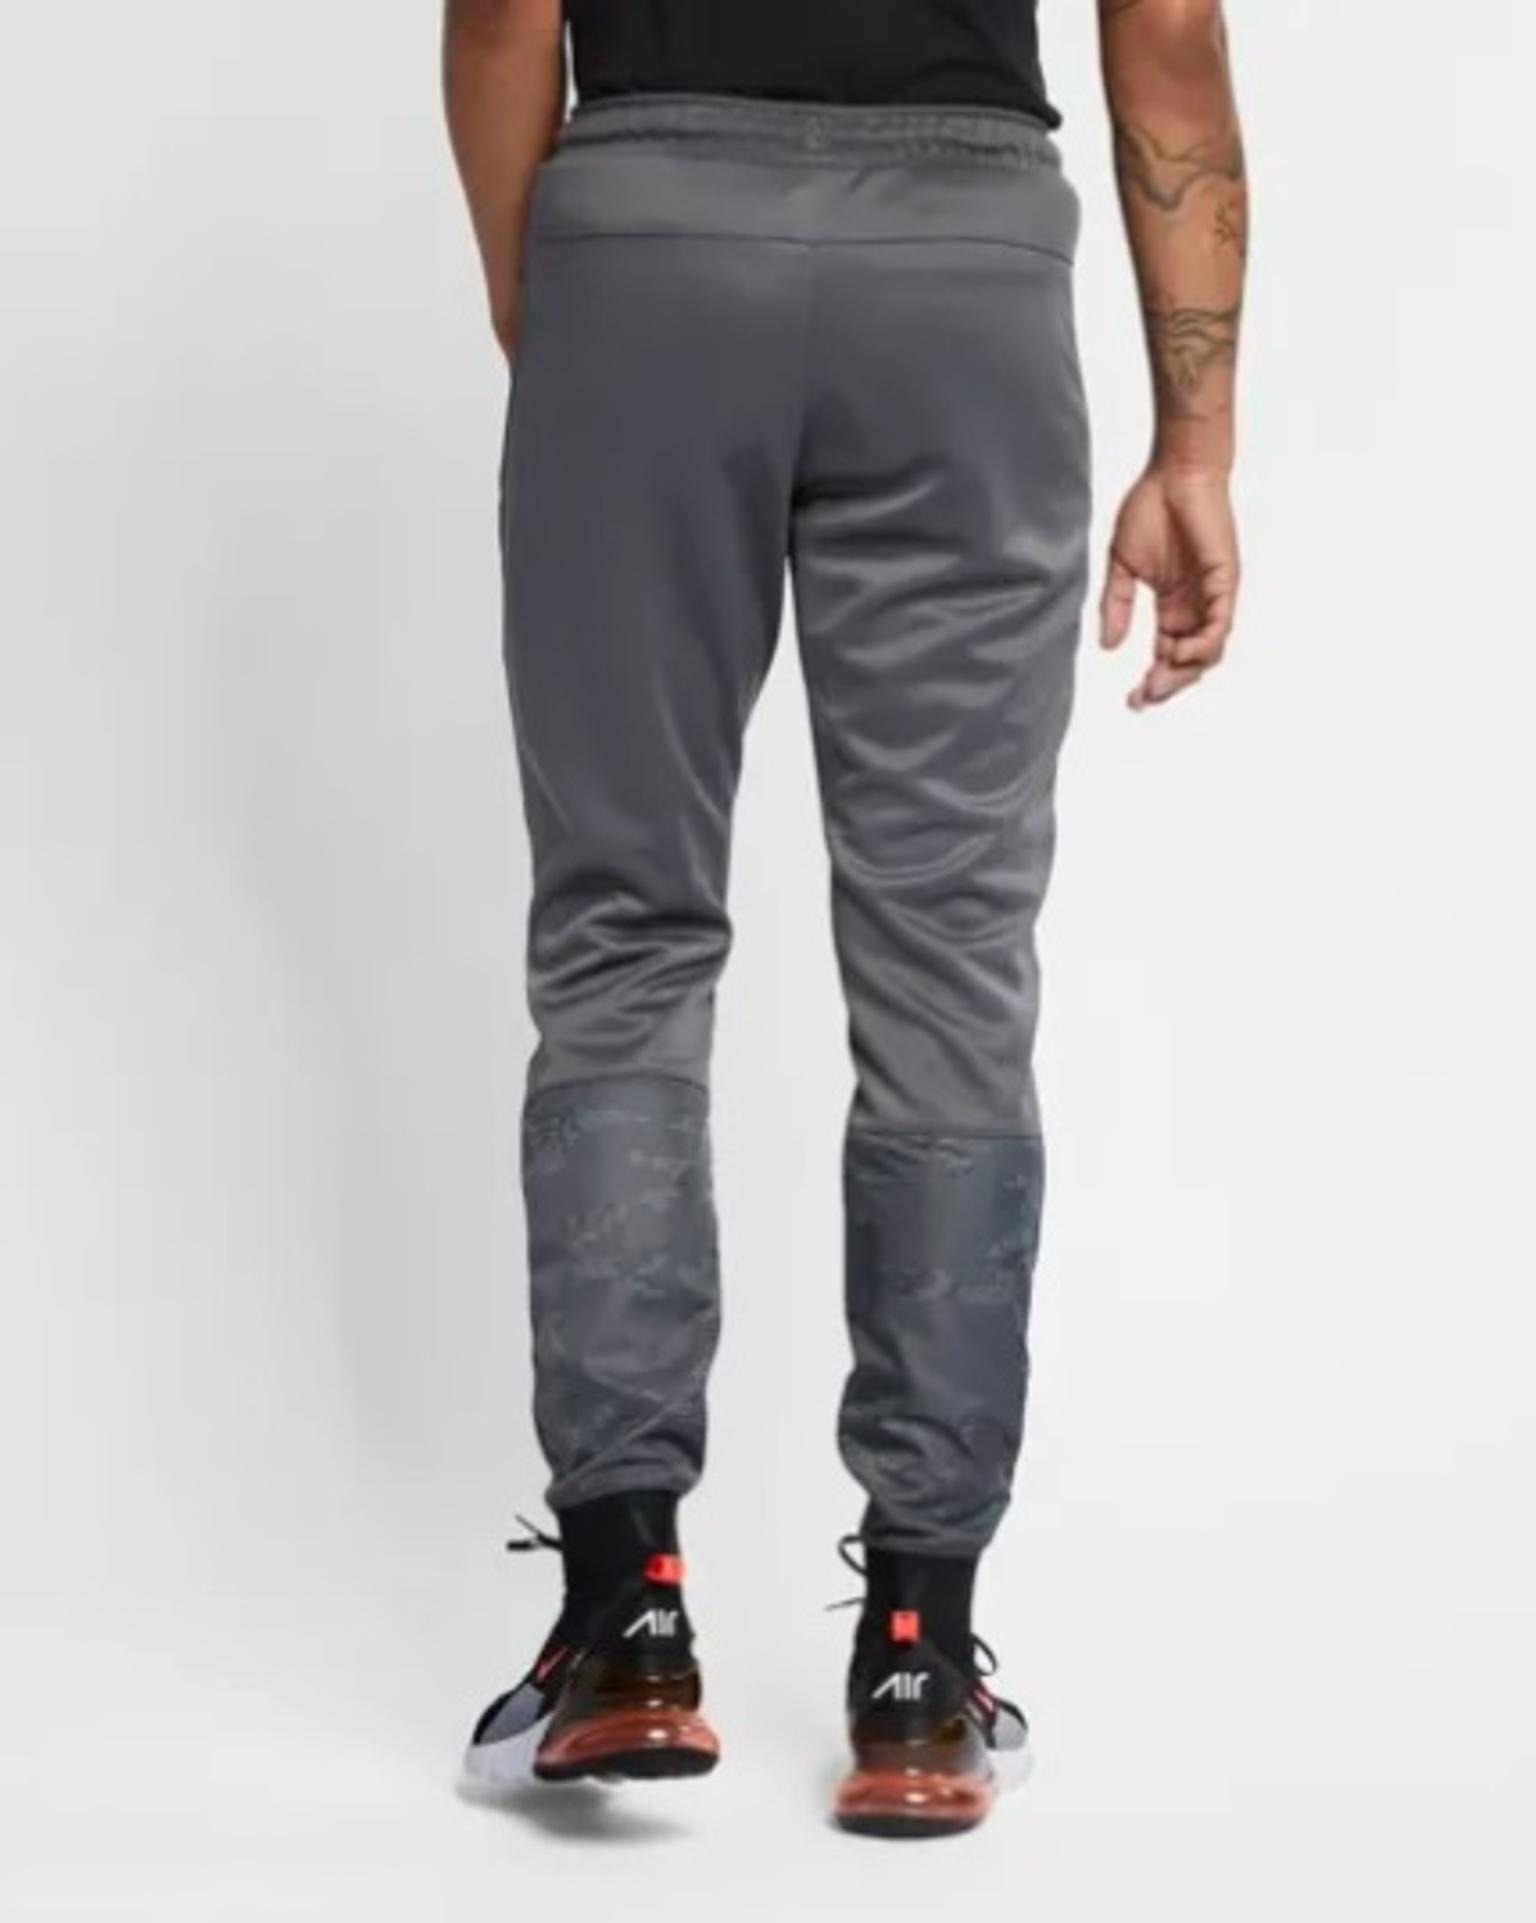 nike air max joggers grey Sale,up to 38 